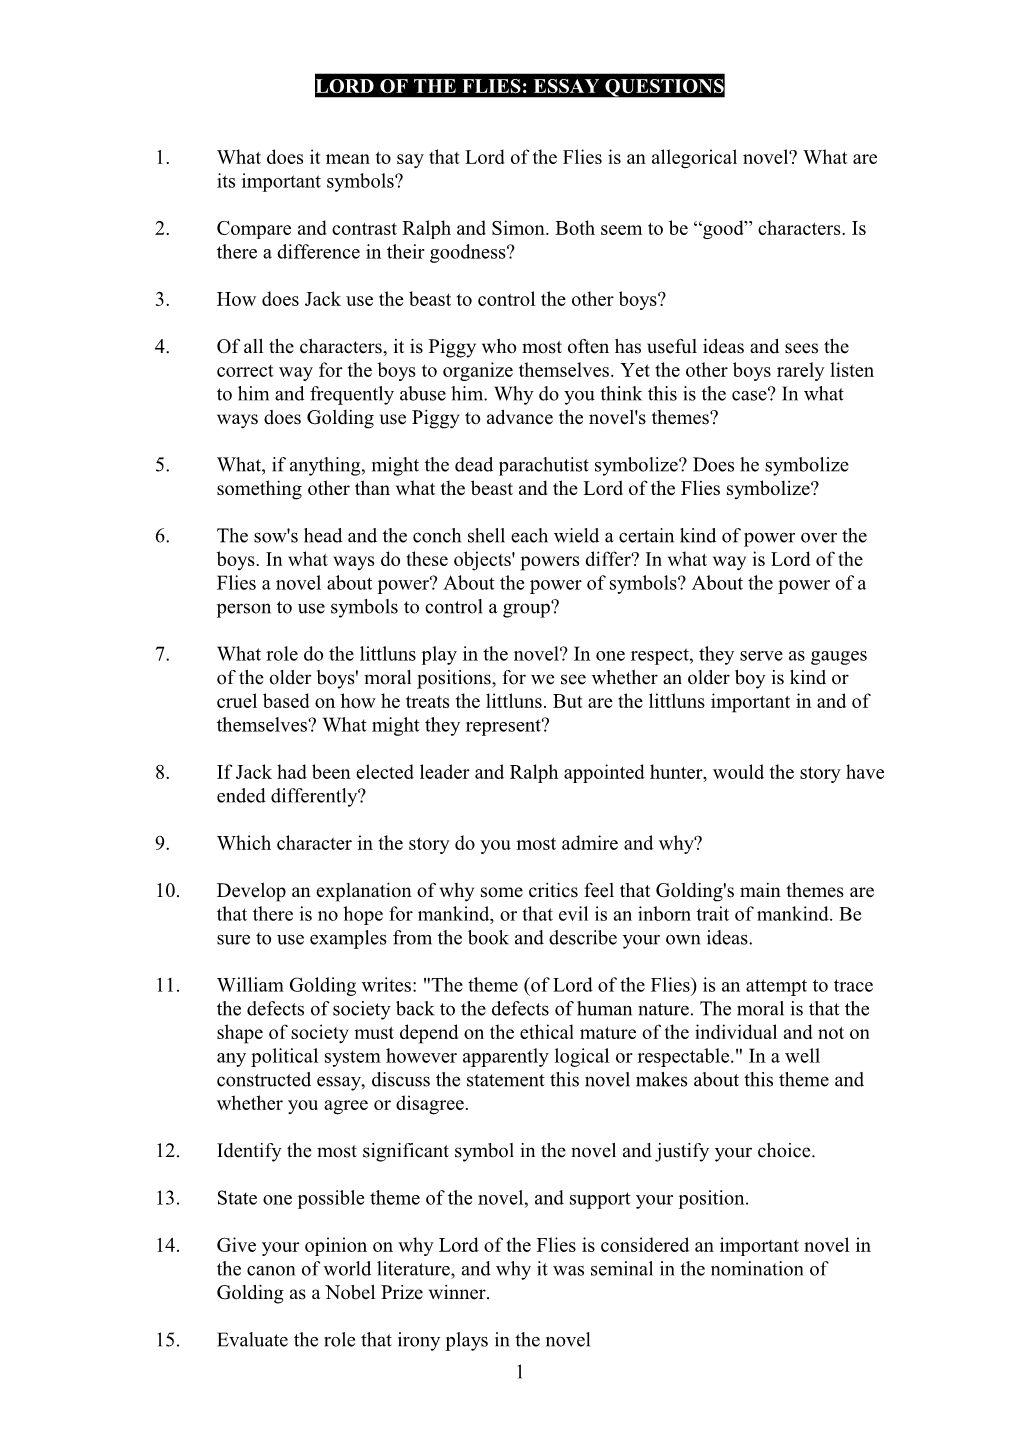 Lord of the Flies: Essay Questions